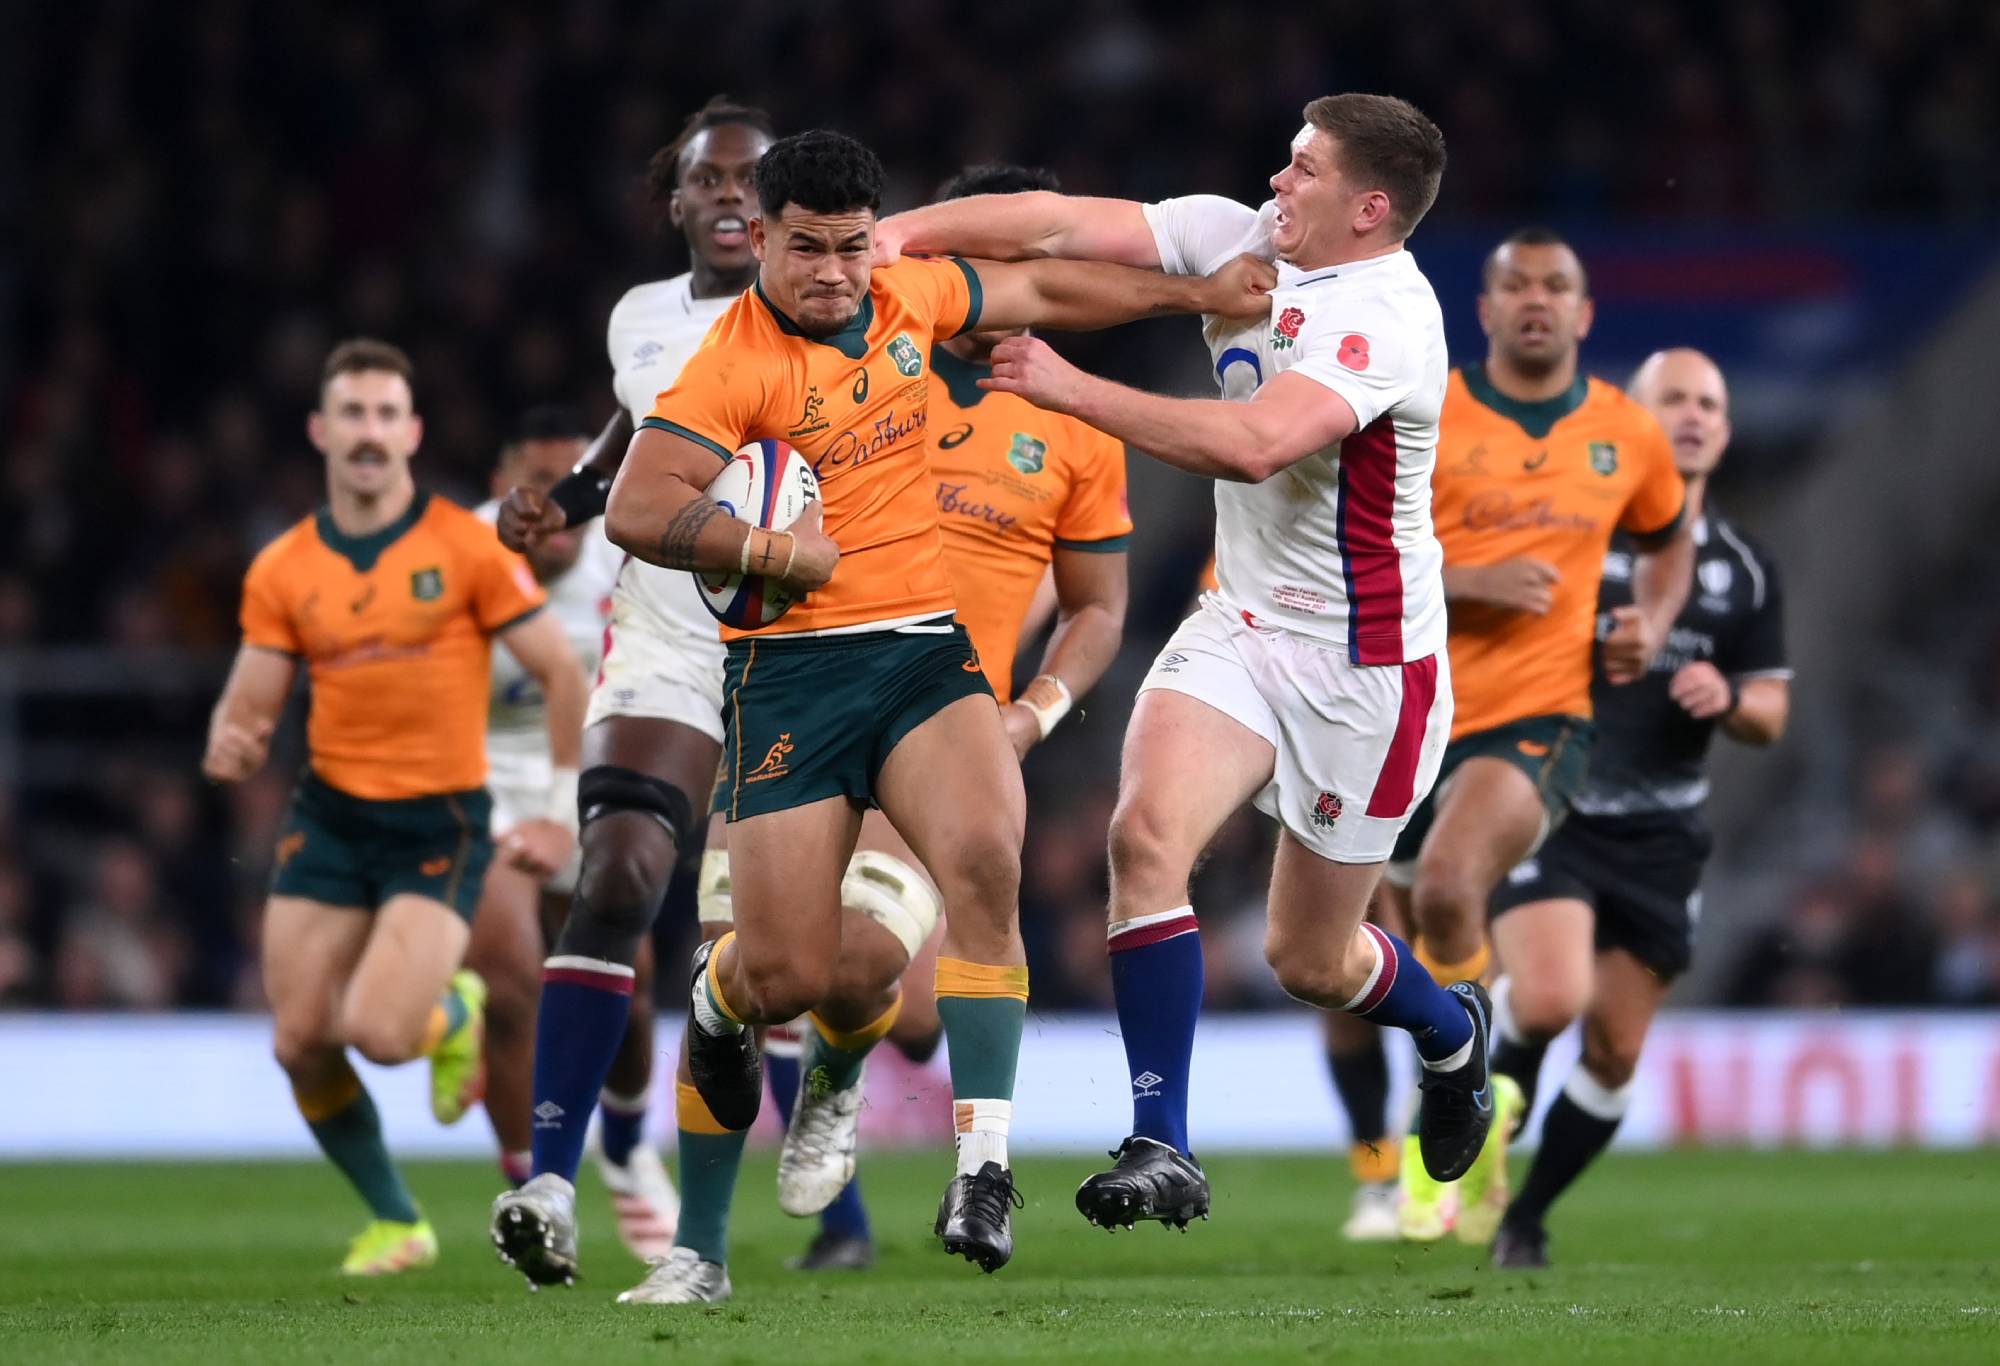 Hunter Paisami of Australia is tackled by Owen Farrell of England during the Autumn Nations Series match between England and Australia at Twickenham Stadium on November 13, 2021 in London, England. (Photo by Laurence Griffiths/Getty Images)